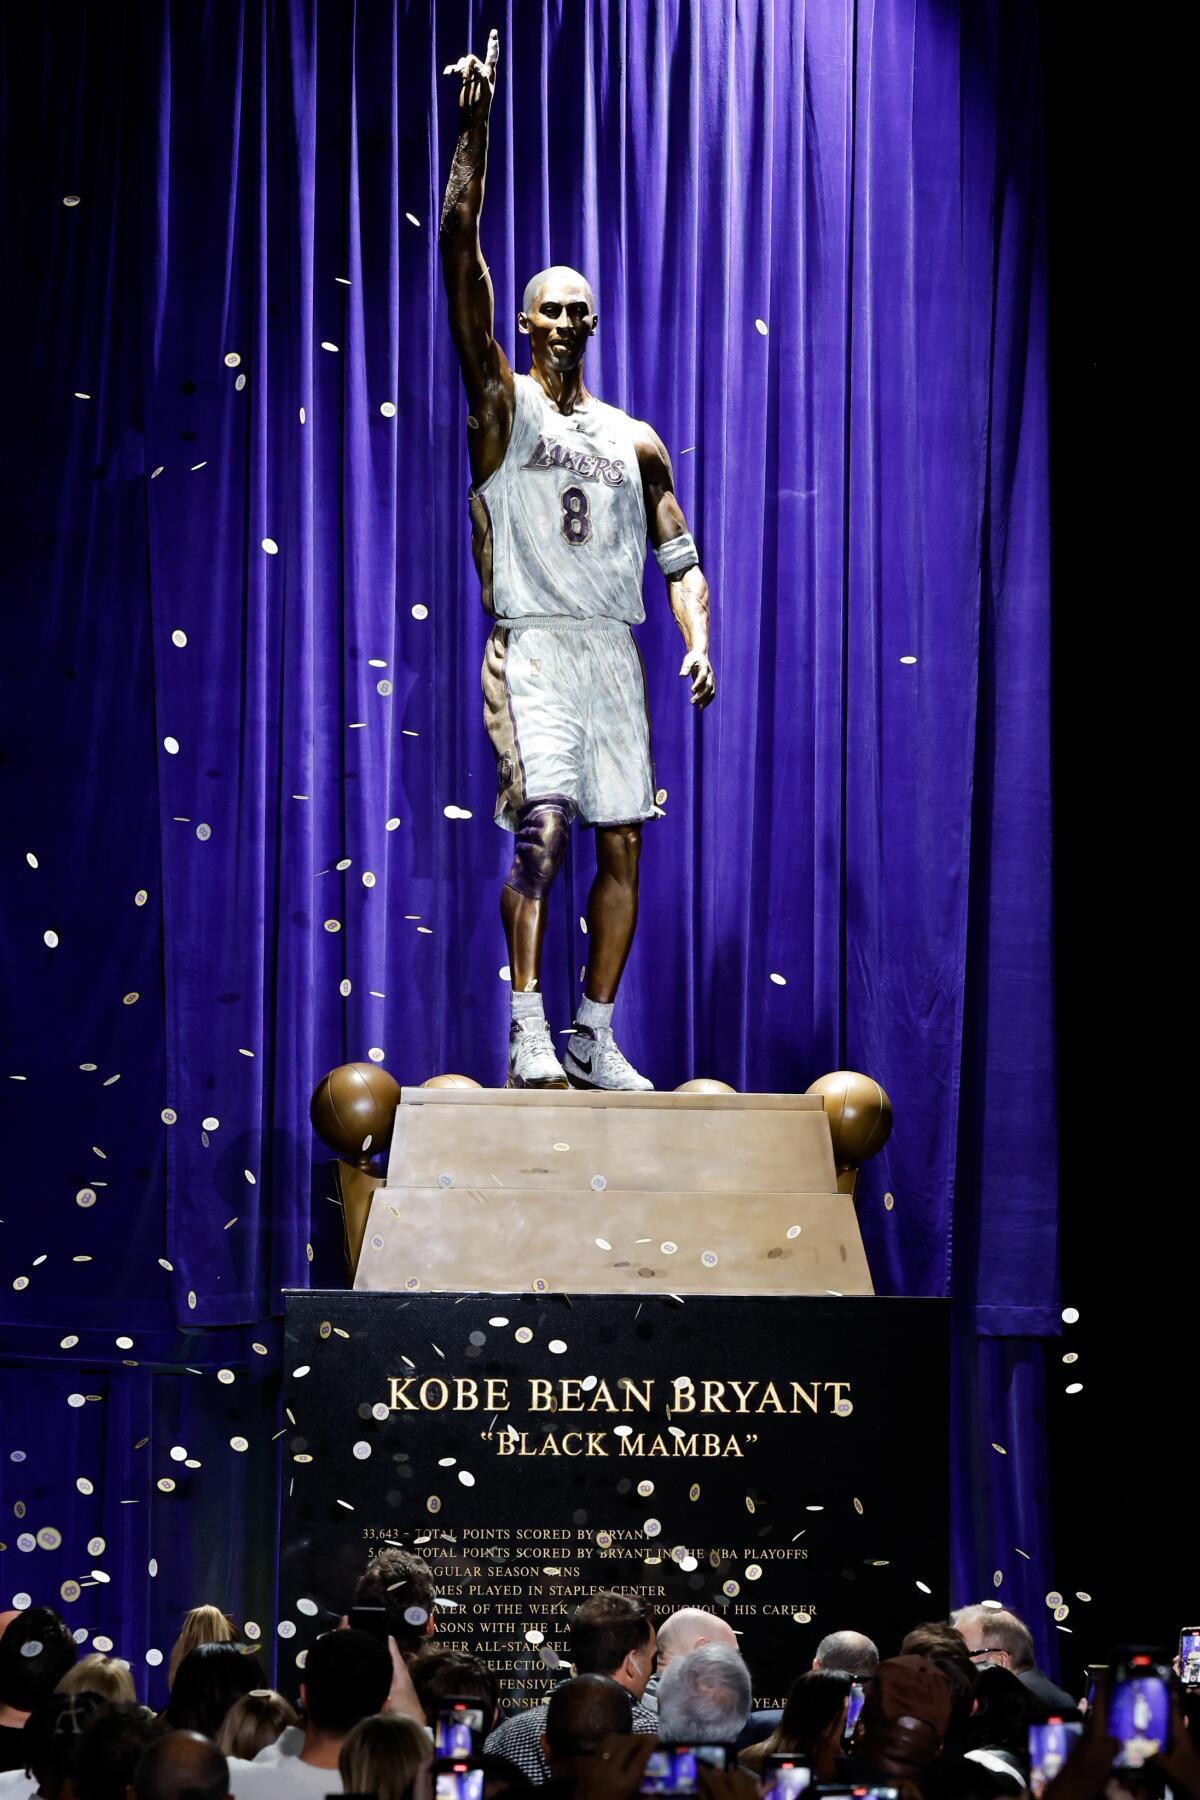 A 19-foot, 4,000-pound bronze statue of Lakers legend Kobe Bryant is unveiled during a ceremony outside Crypto.com Arena.